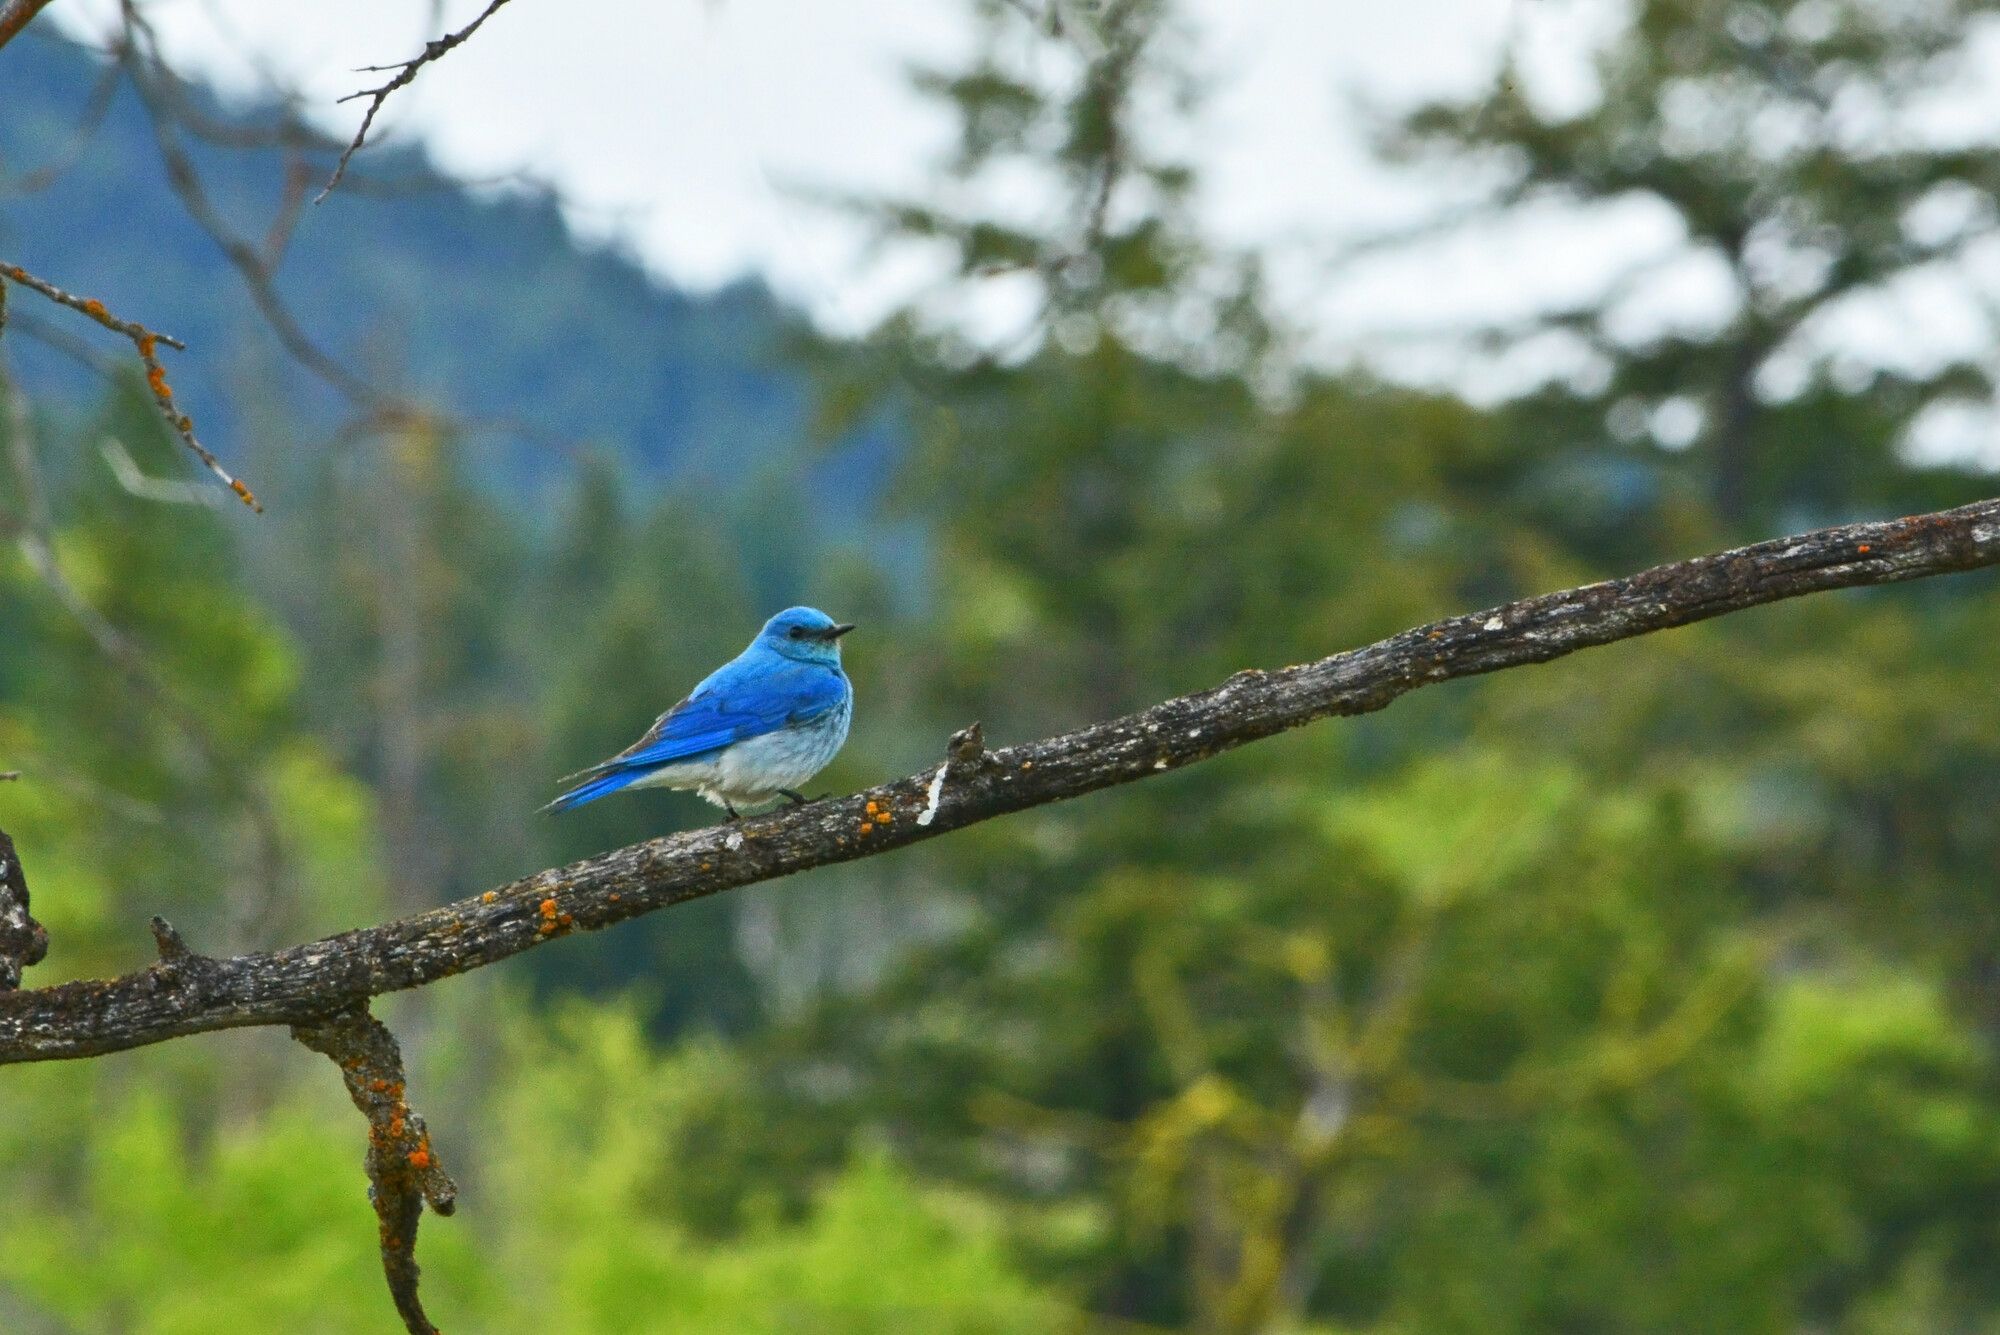 Mountain Bluebird (Sialia currucoides) is a songbird found in mountainous districts of western North America. This bright turquoise-blue is the colour of the male. Kentucky-Alleyne Park.